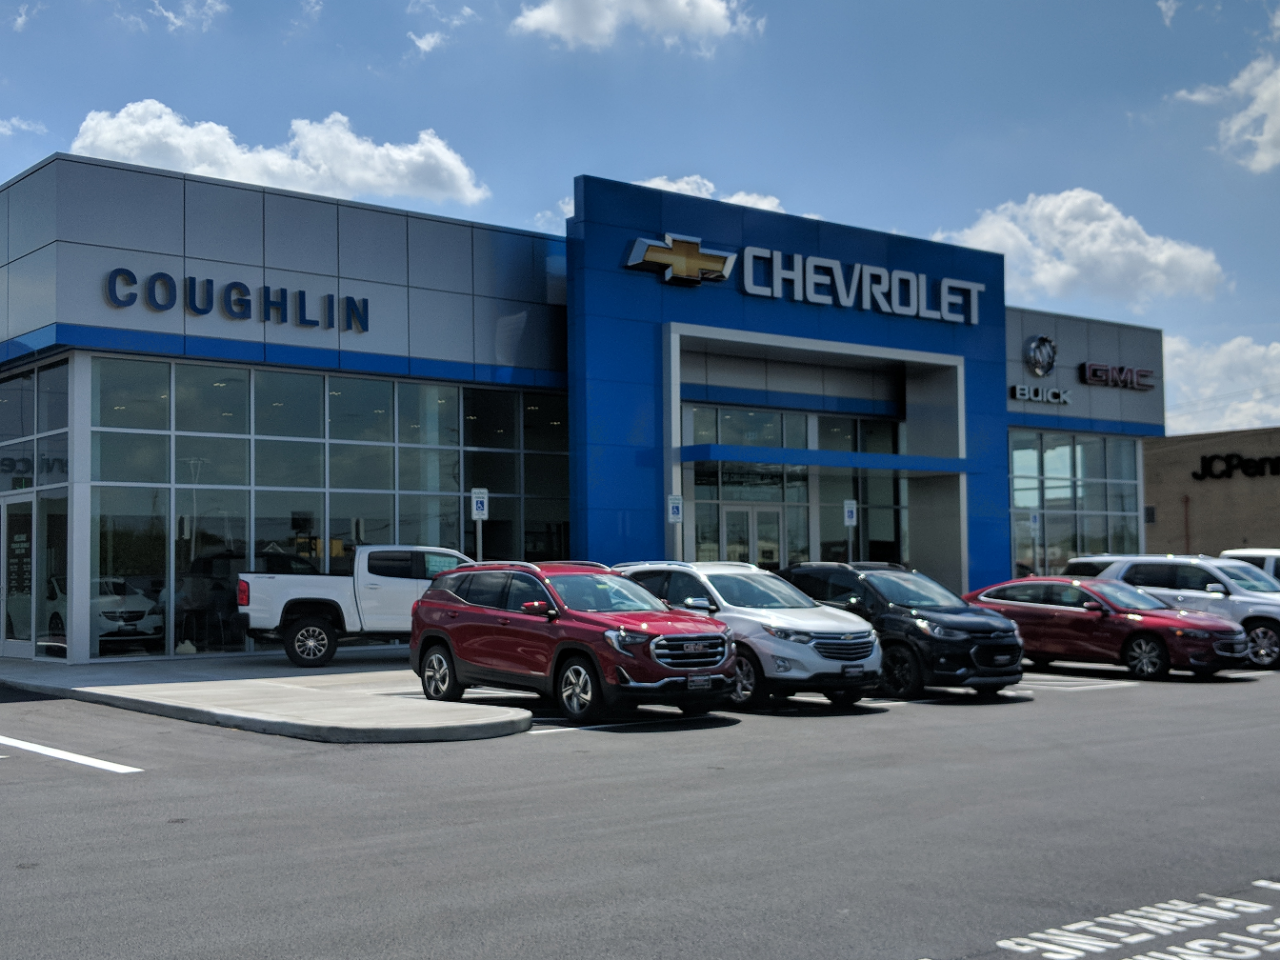 Coughlin GM of Chillicothe